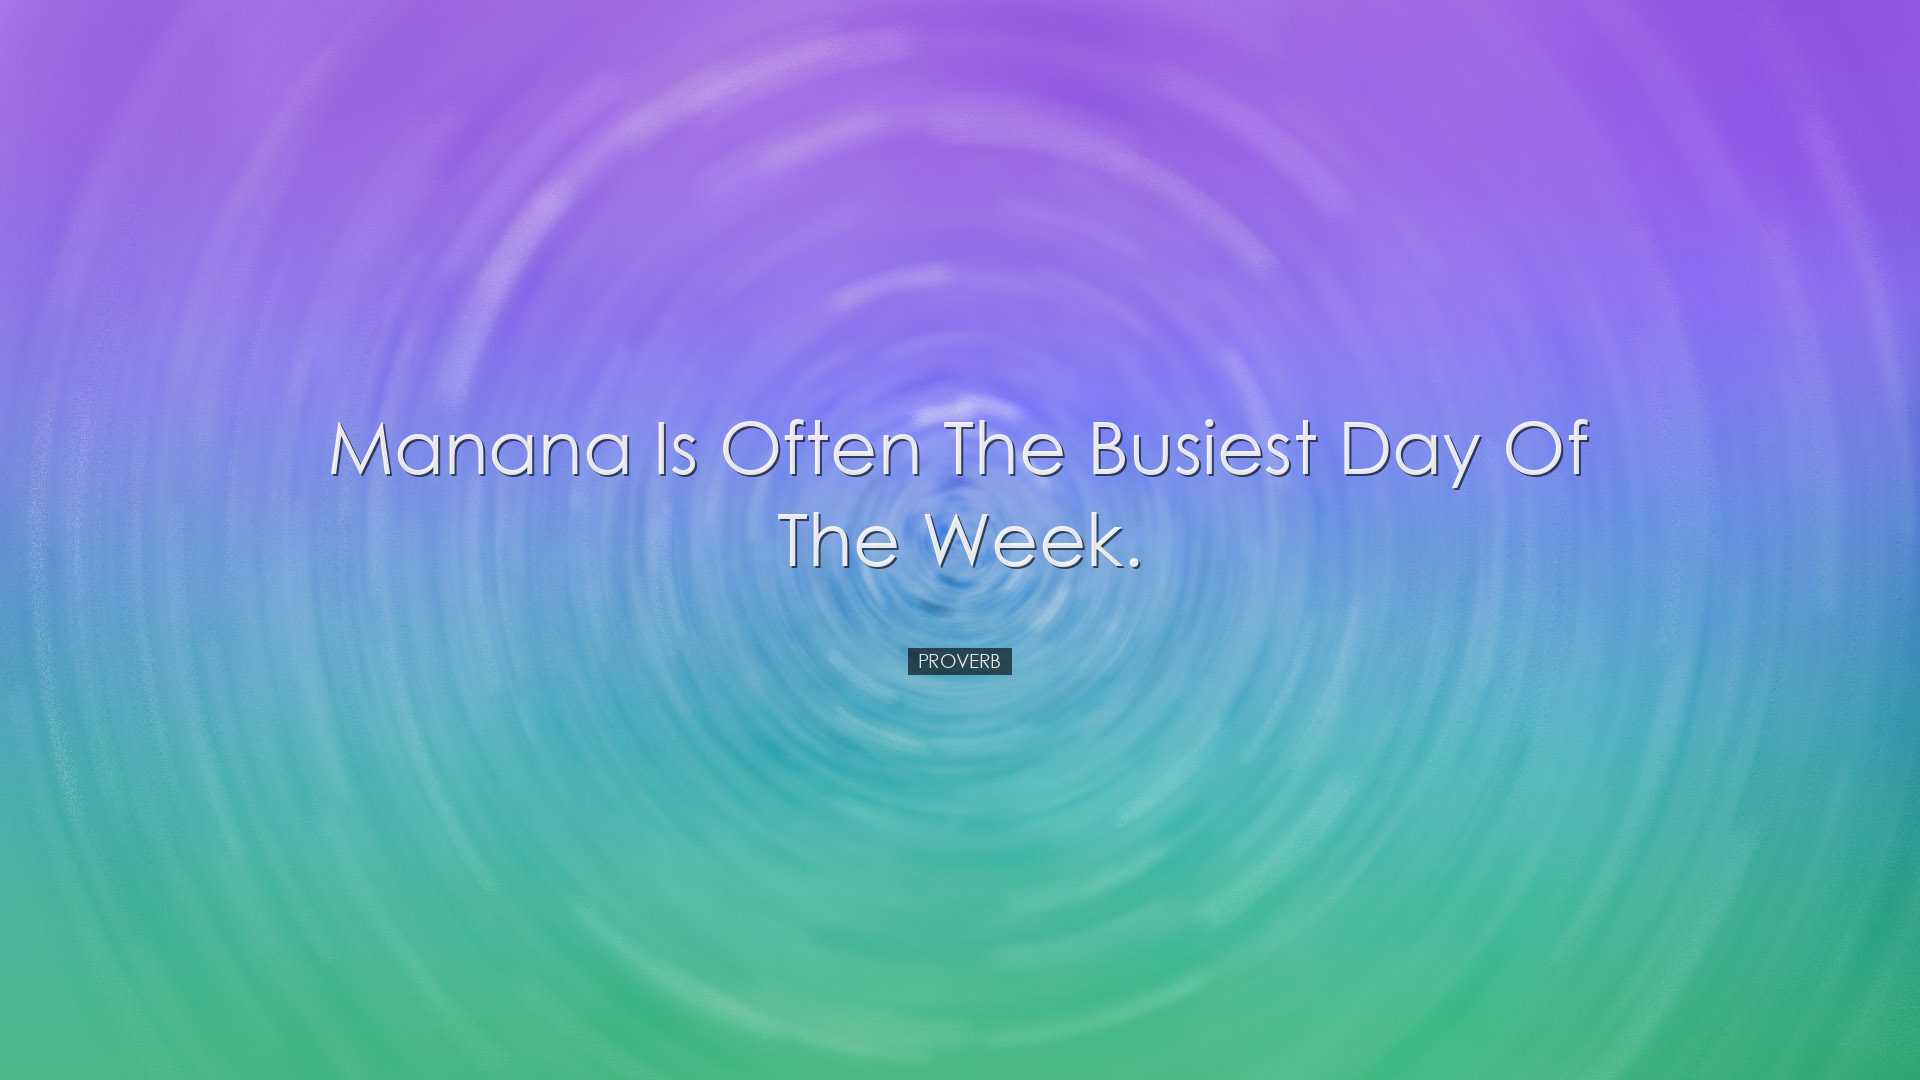 Manana is often the busiest day of the week. - Proverb